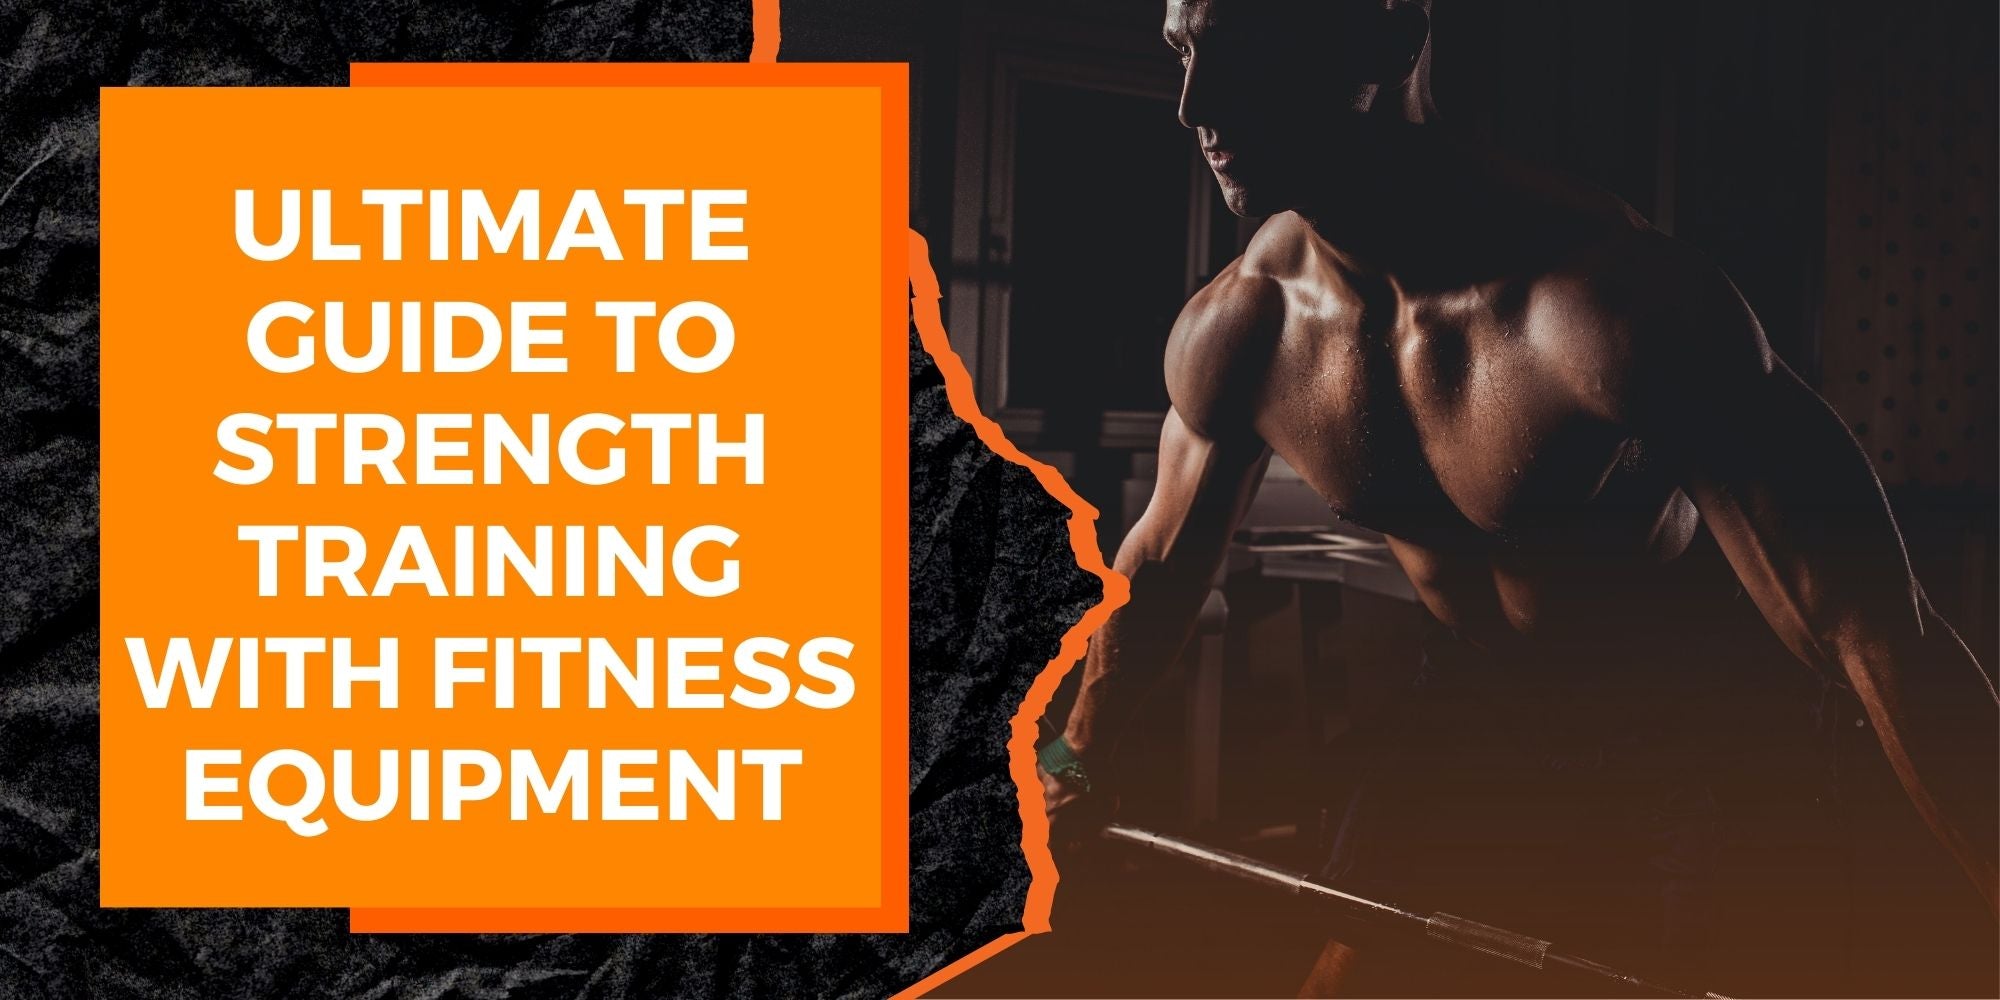 The Ultimate Guide to Strength Training with Fitness Equipment